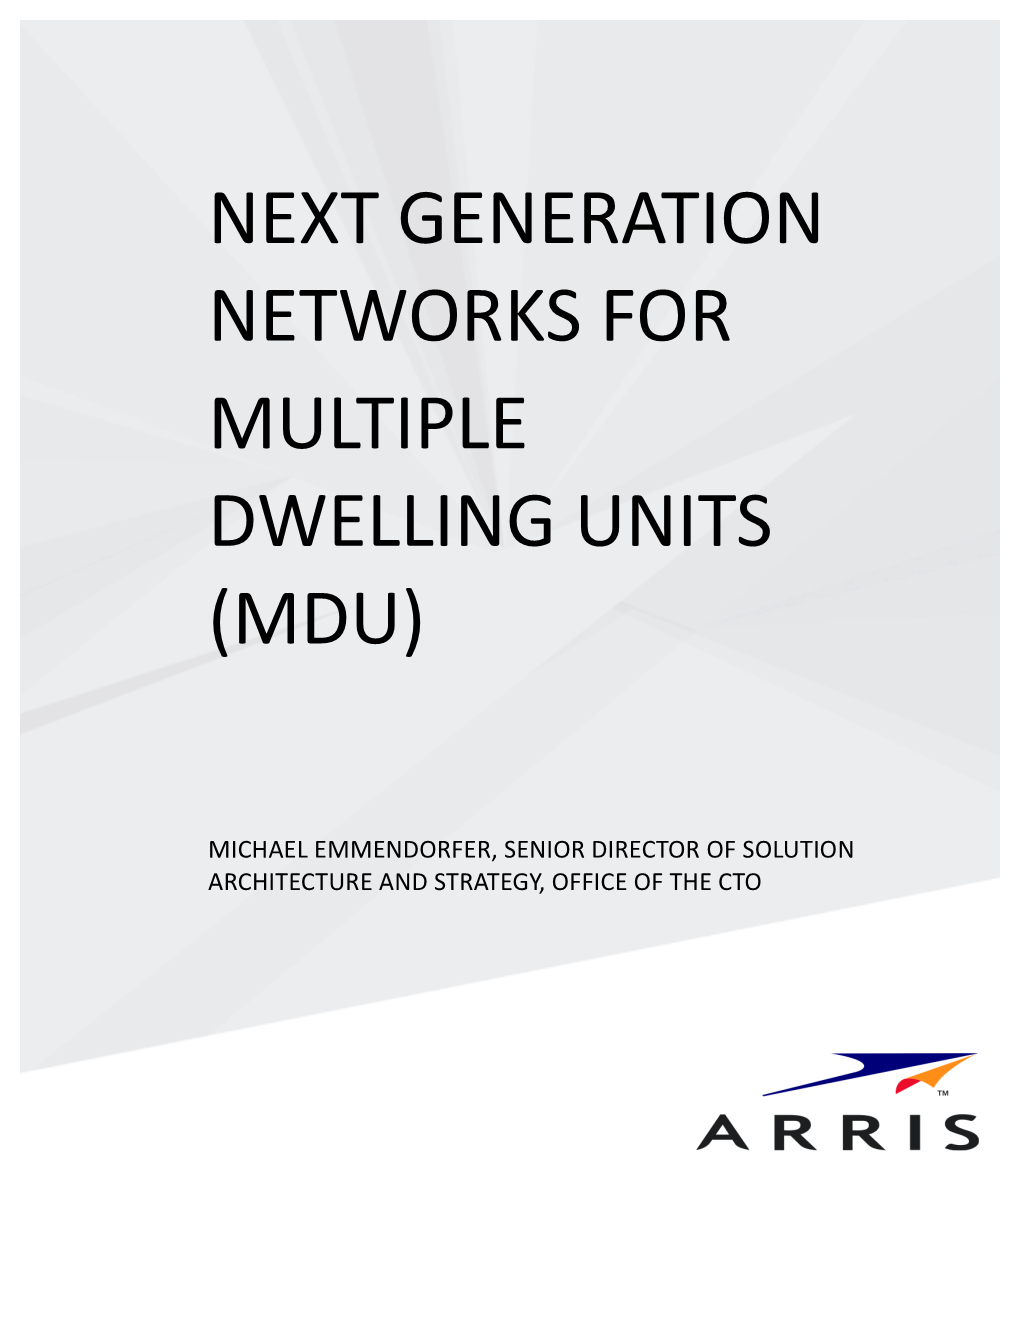 Next Generation Networks for Multiple Dwelling Units (Mdu)